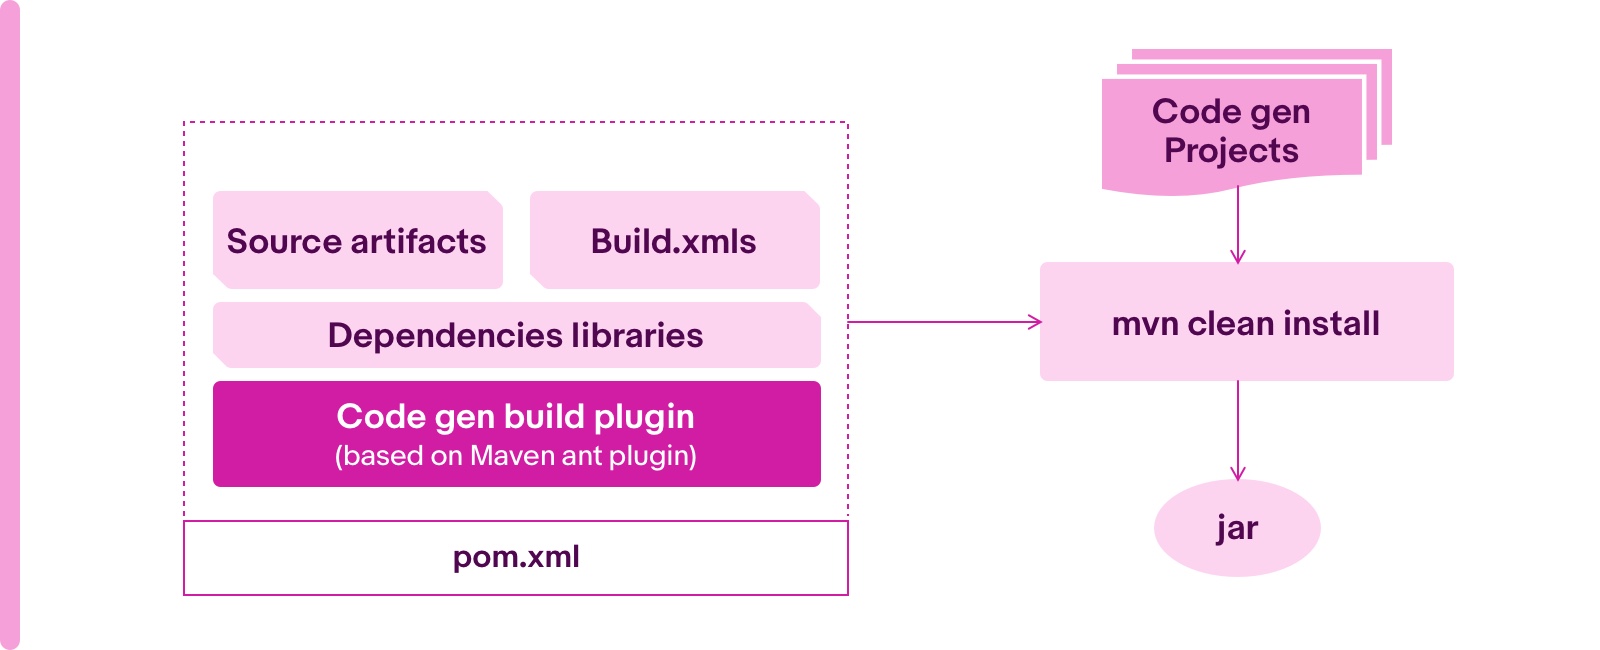 A graphic showing the maven plugin